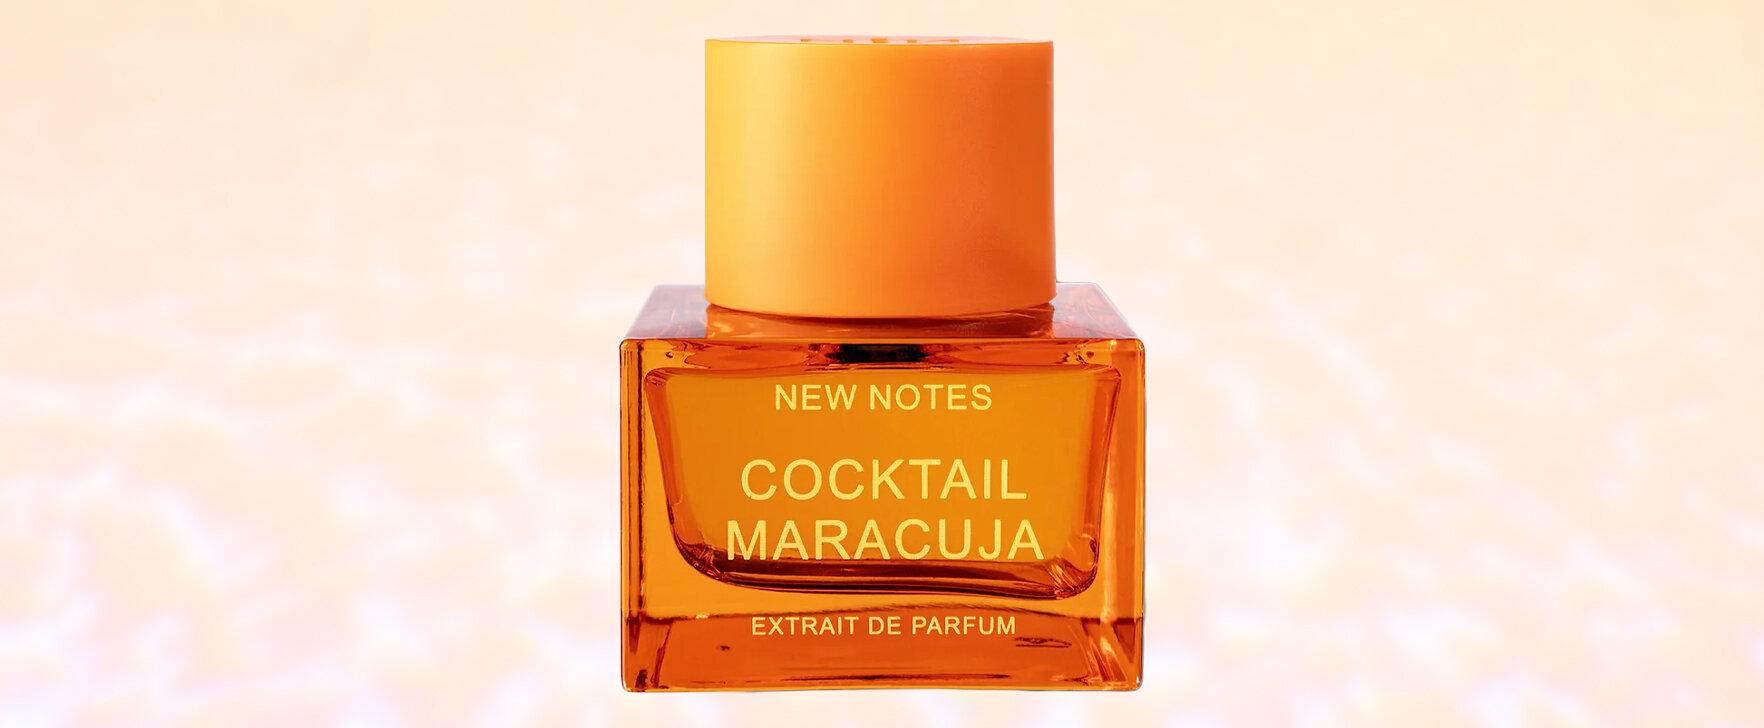 Cocktail Maracuja: The Exotic Fragrance Novelty From New Notes